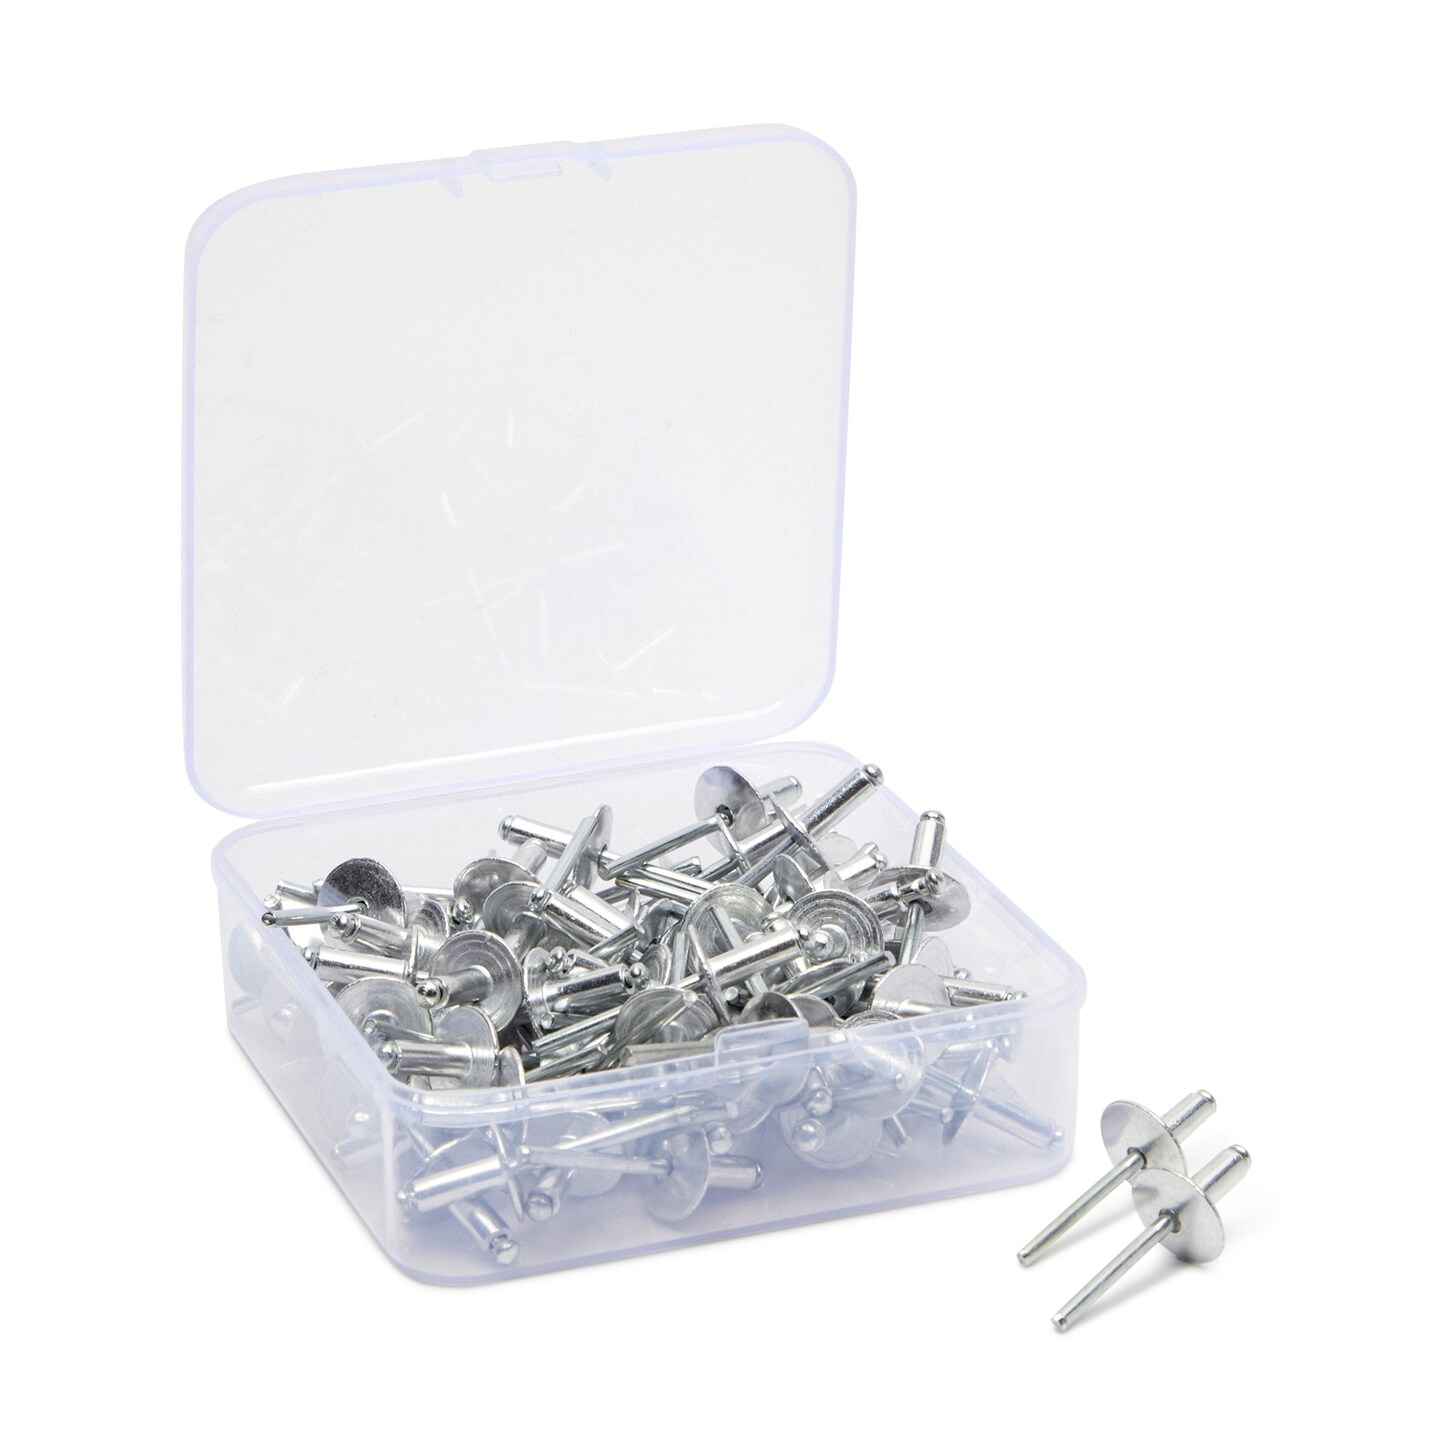 80 Pieces 3/16 x 1/2 Large Flange Aluminum Pop Rivets for Metal, Blind  Fasteners (Silver)